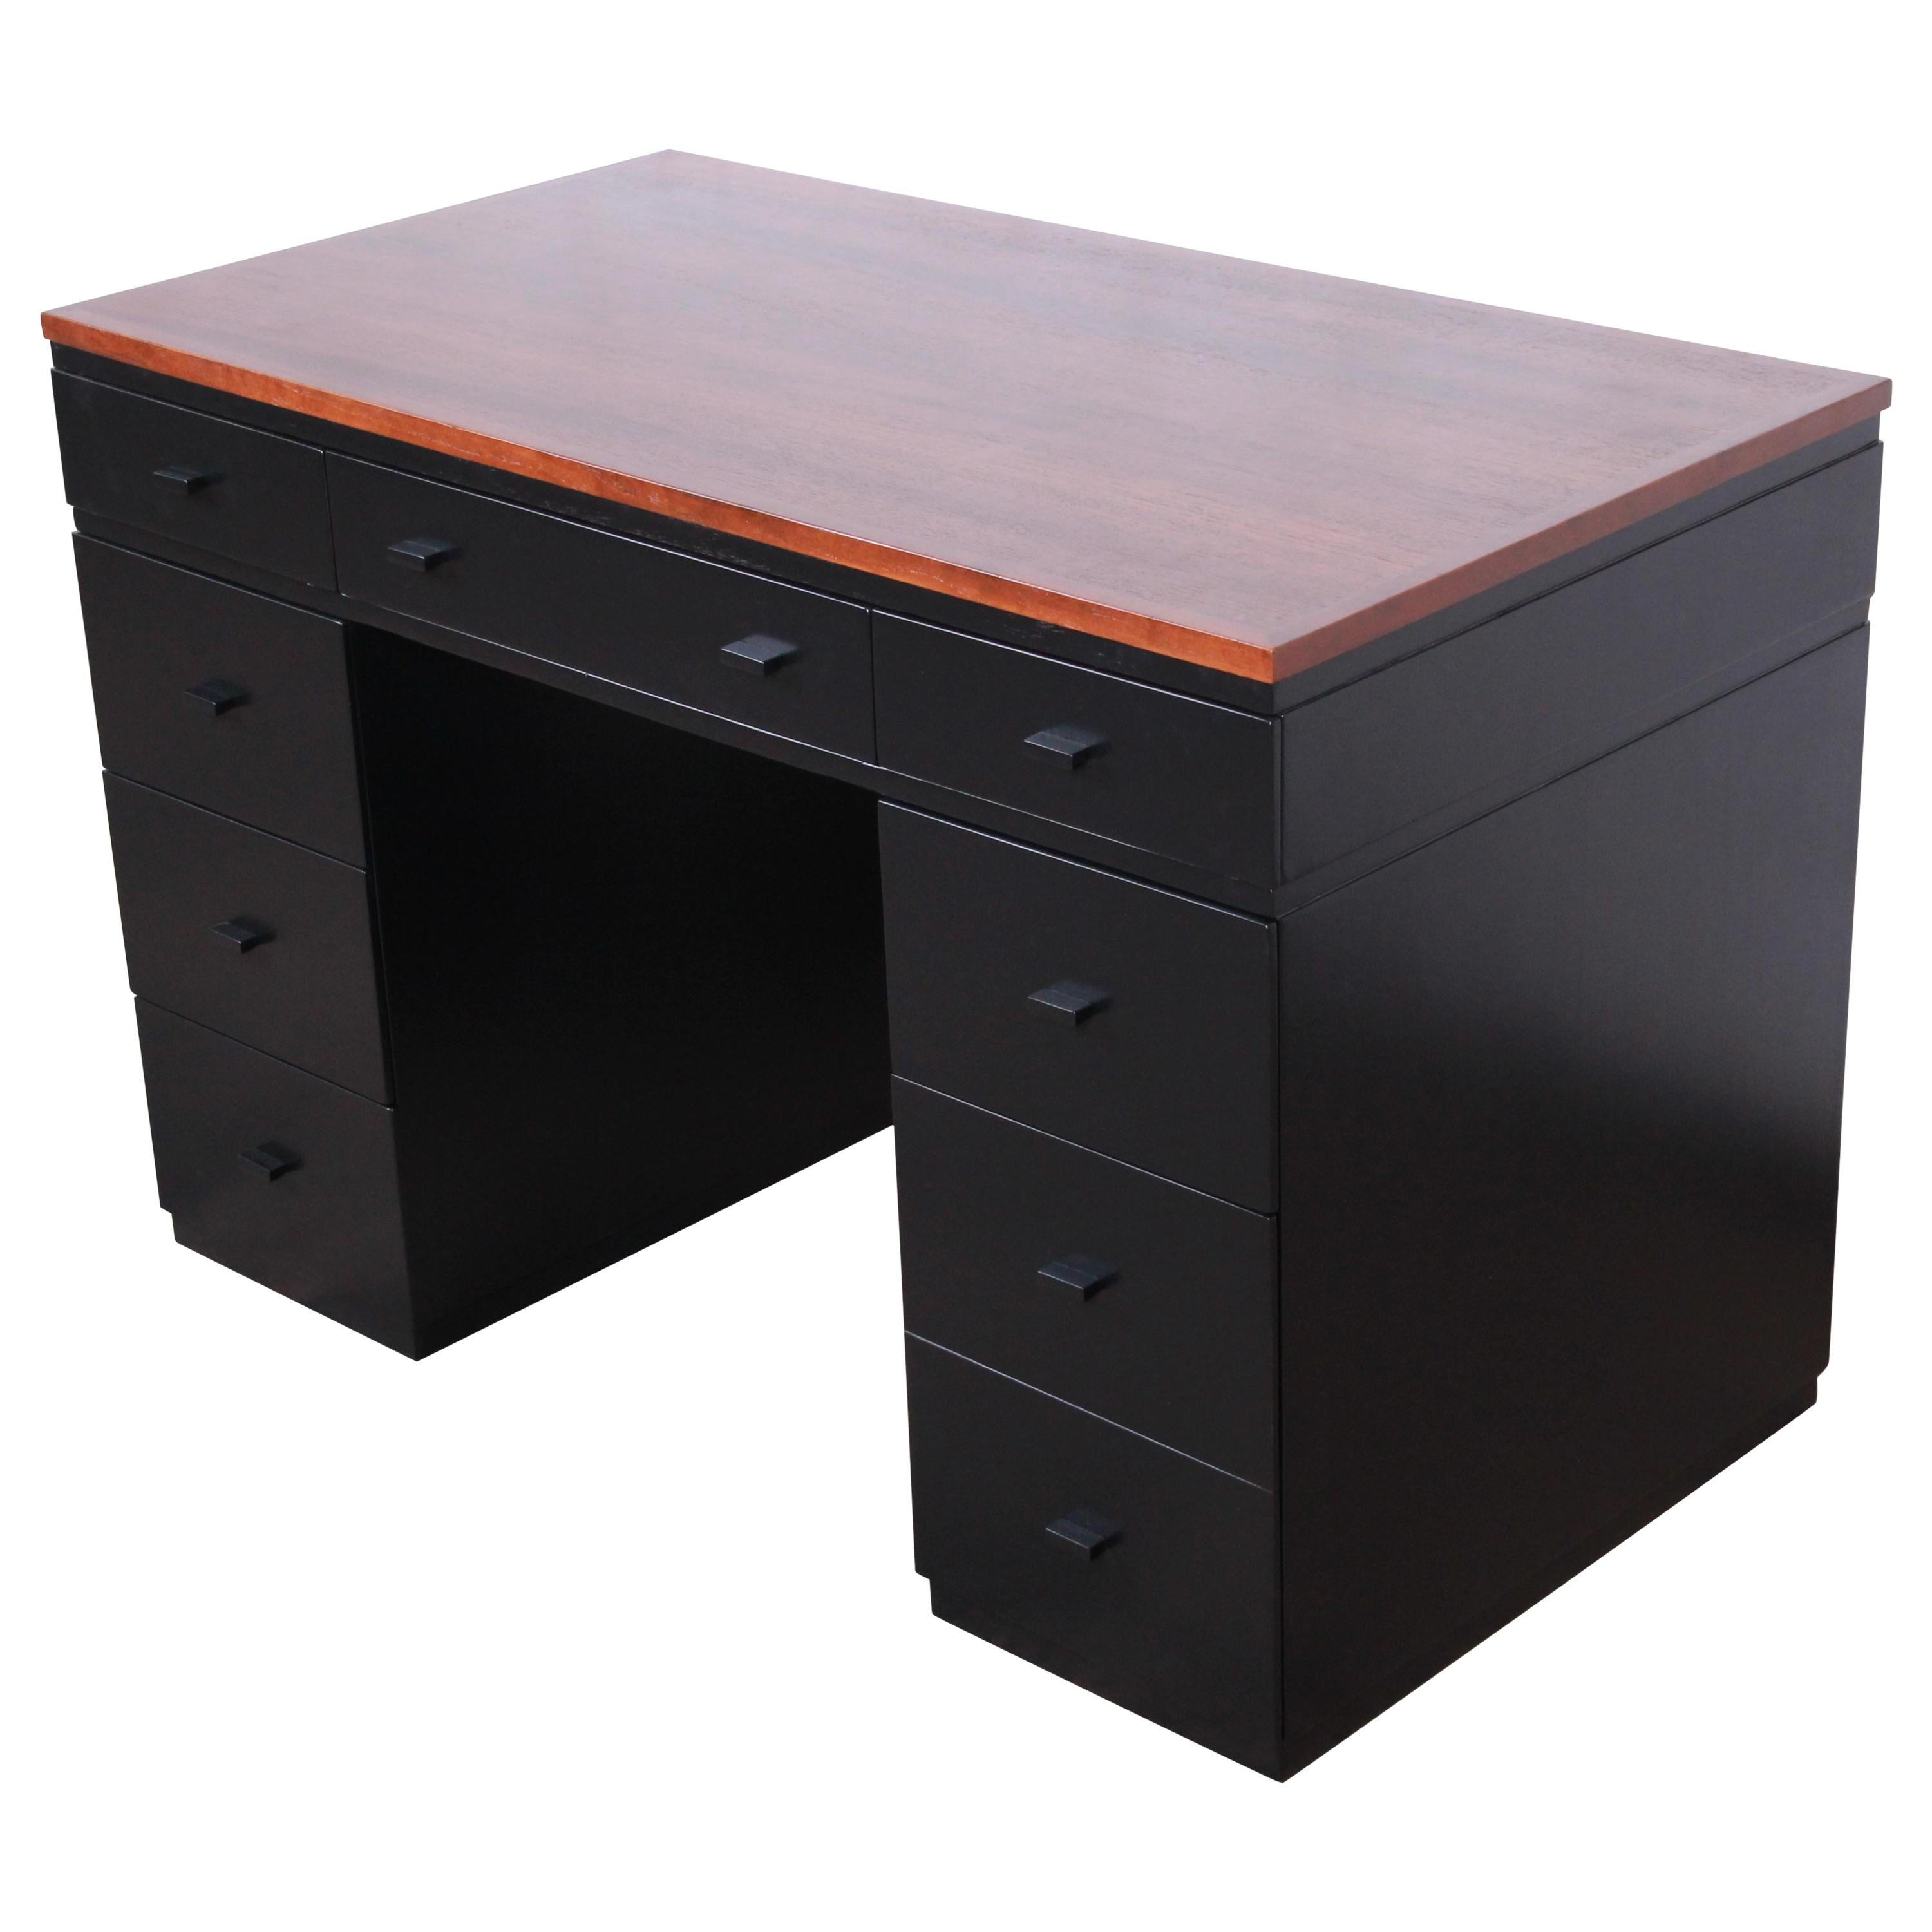 Early Edward Wormley for Dunbar Walnut and Black Lacquered Kneehole Desk, 1940s